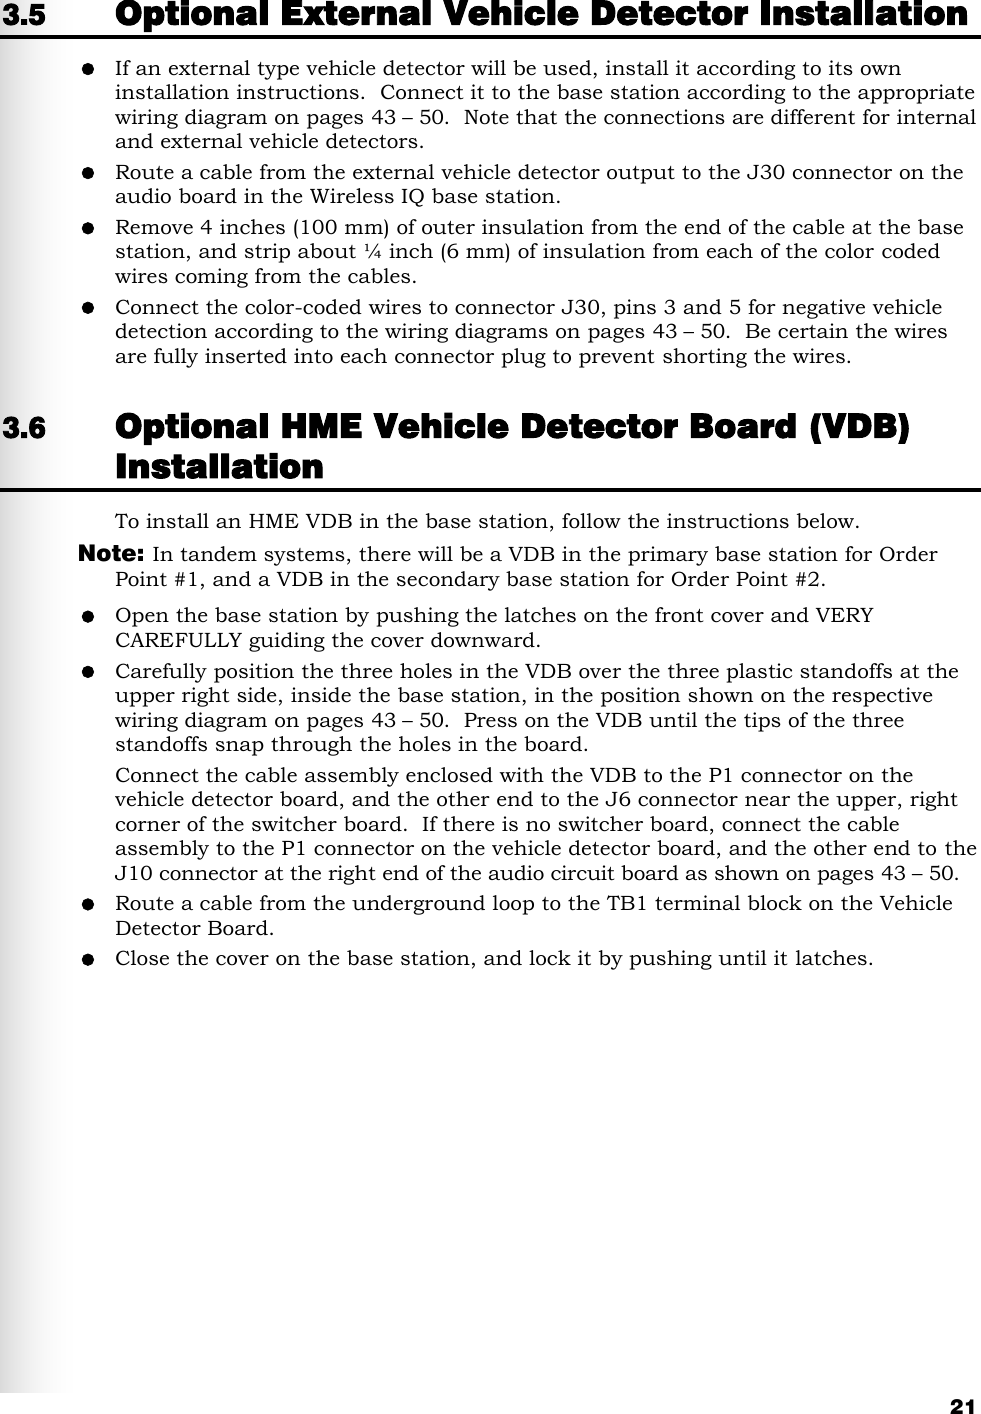   21 3.5 Optional External Vehicle Detector Installation  If an external type vehicle detector will be used, install it according to its own installation instructions.  Connect it to the base station according to the appropriate wiring diagram on pages 43 – 50.  Note that the connections are different for internal and external vehicle detectors.  Route a cable from the external vehicle detector output to the J30 connector on the audio board in the Wireless IQ base station.  Remove 4 inches (100 mm) of outer insulation from the end of the cable at the base station, and strip about ¼ inch (6 mm) of insulation from each of the color coded wires coming from the cables.  Connect the color-coded wires to connector J30, pins 3 and 5 for negative vehicle detection according to the wiring diagrams on pages 43 – 50.  Be certain the wires are fully inserted into each connector plug to prevent shorting the wires. 3.6 Optional HME Vehicle Detector Board (VDB) Installation To install an HME VDB in the base station, follow the instructions below.  Note:  In tandem systems, there will be a VDB in the primary base station for Order Point #1, and a VDB in the secondary base station for Order Point #2.  Open the base station by pushing the latches on the front cover and VERY CAREFULLY guiding the cover downward.  Carefully position the three holes in the VDB over the three plastic standoffs at the upper right side, inside the base station, in the position shown on the respective wiring diagram on pages 43 – 50.  Press on the VDB until the tips of the three standoffs snap through the holes in the board. Connect the cable assembly enclosed with the VDB to the P1 connector on the vehicle detector board, and the other end to the J6 connector near the upper, right corner of the switcher board.  If there is no switcher board, connect the cable assembly to the P1 connector on the vehicle detector board, and the other end to the J10 connector at the right end of the audio circuit board as shown on pages 43 – 50.   Route a cable from the underground loop to the TB1 terminal block on the Vehicle Detector Board.  Close the cover on the base station, and lock it by pushing until it latches. 